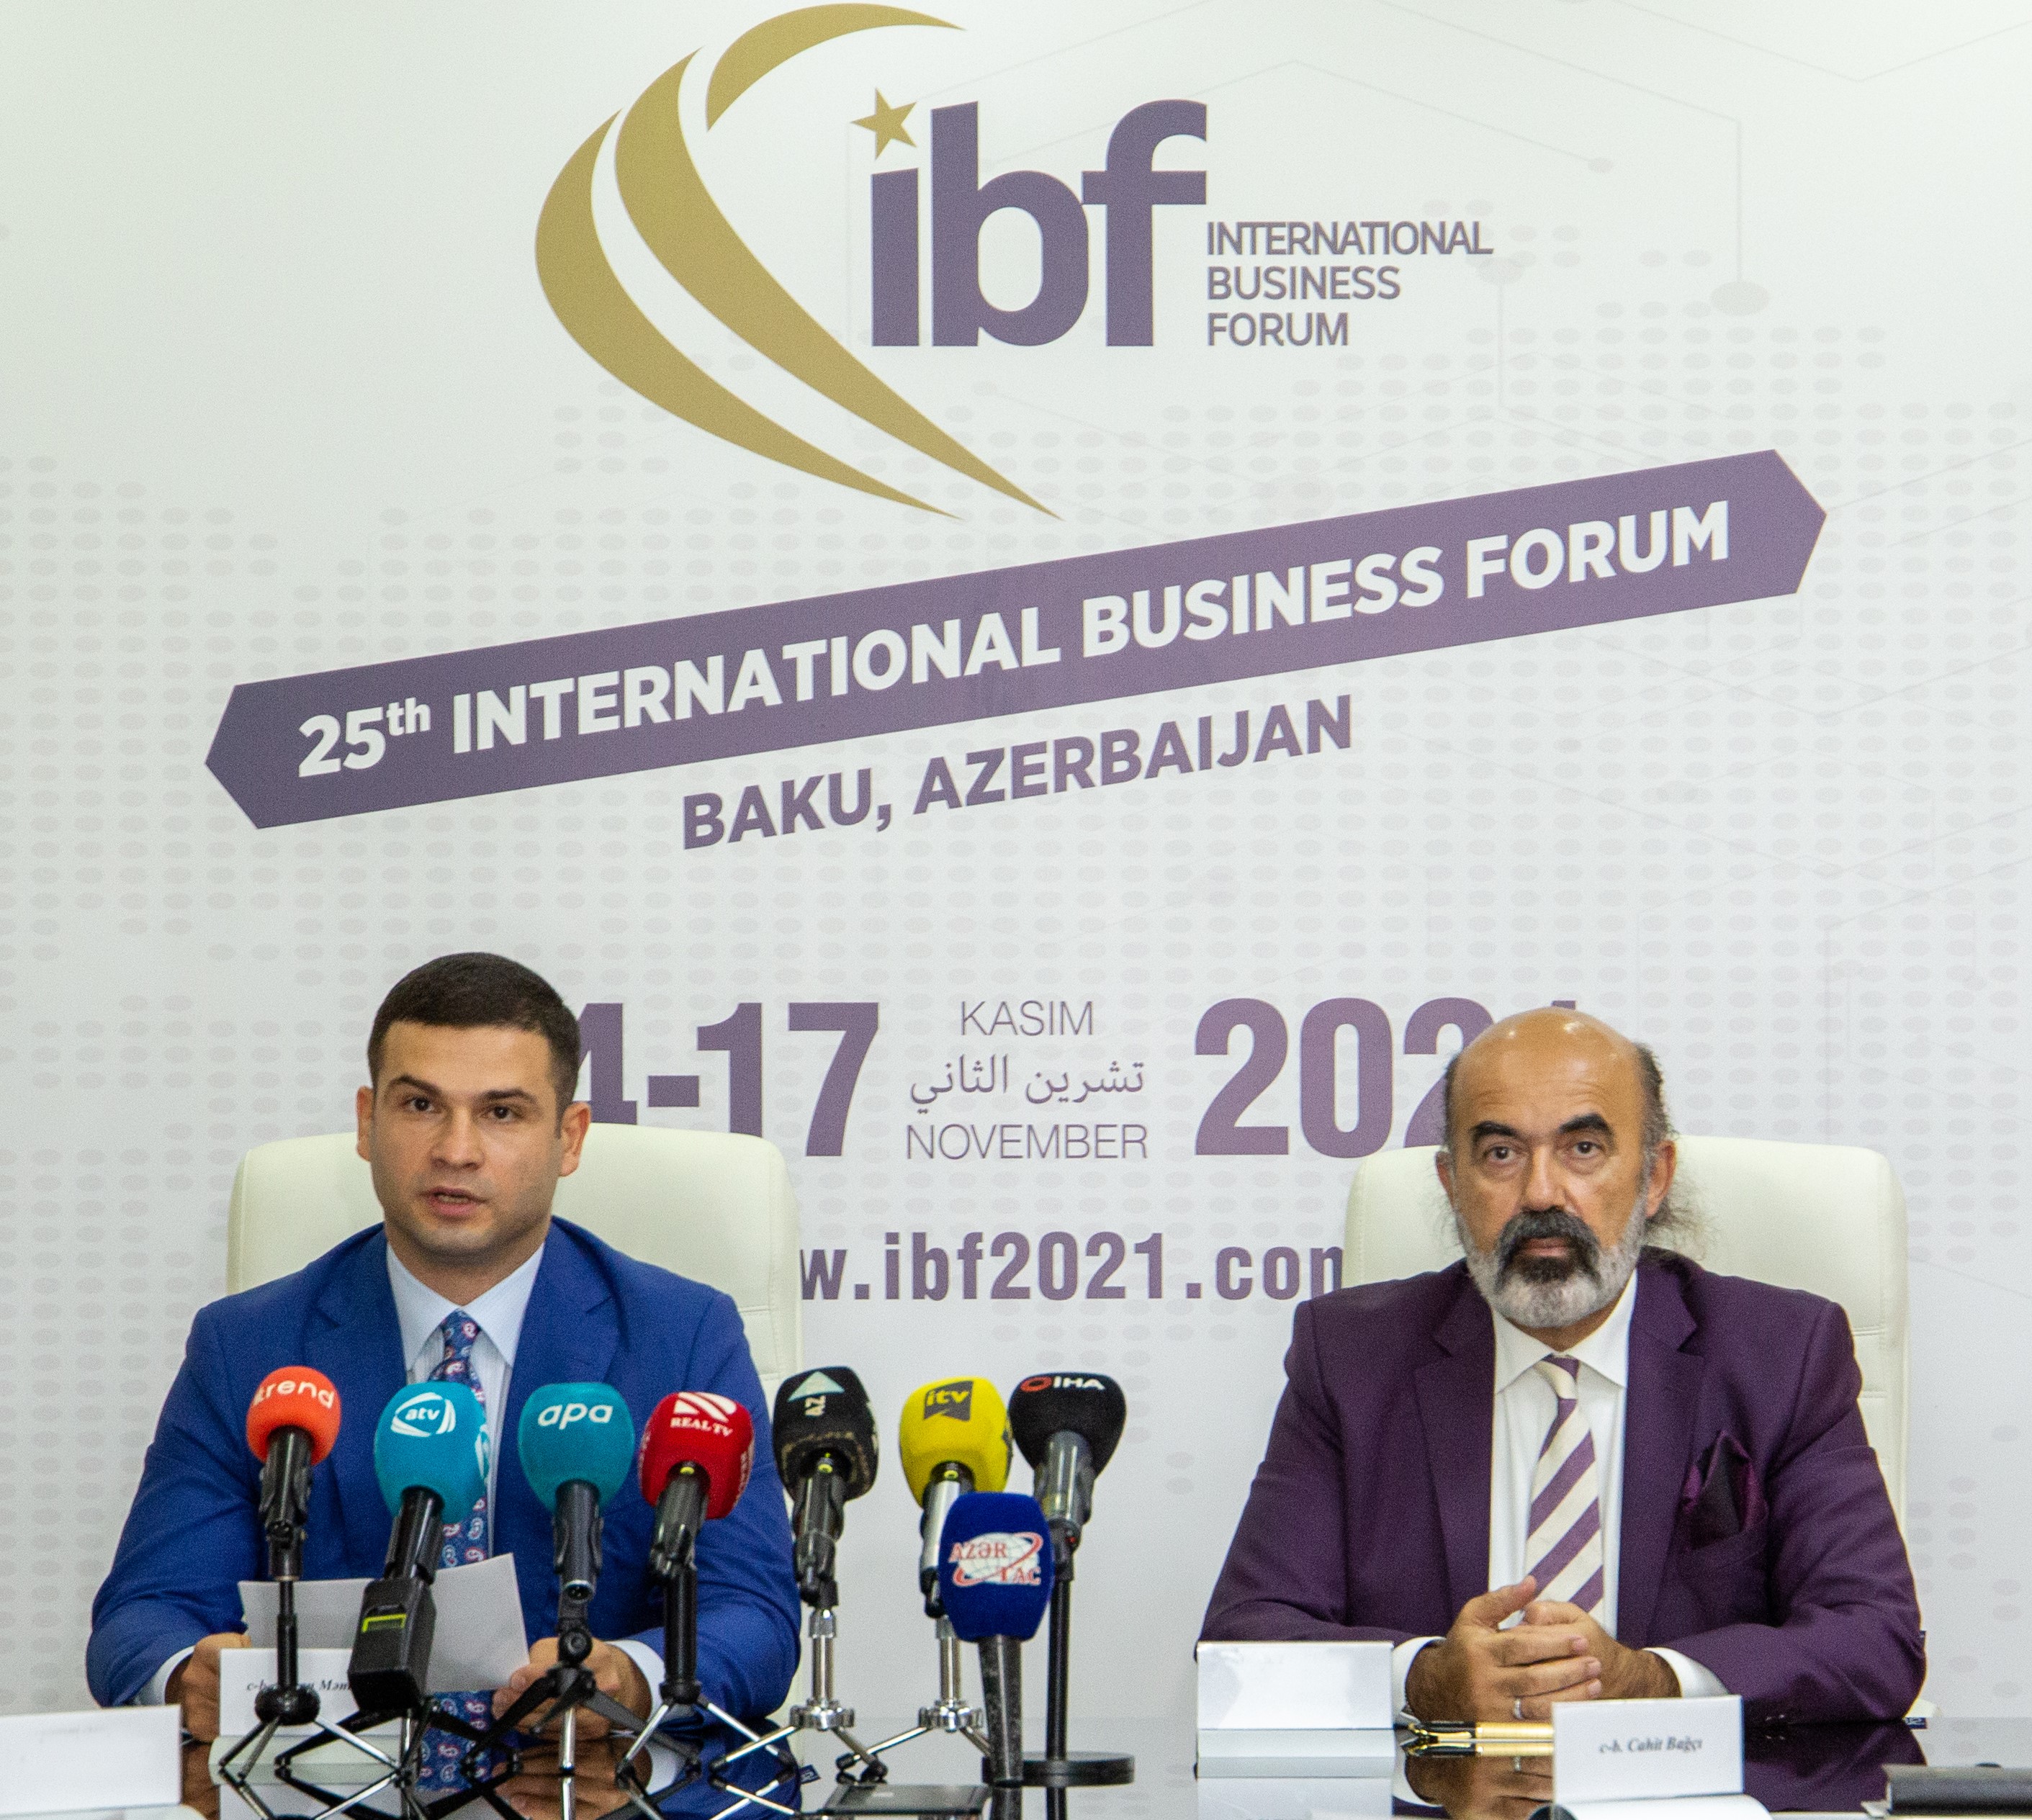 A press conference took place in connection with the International Business Forum to be held in Baku 